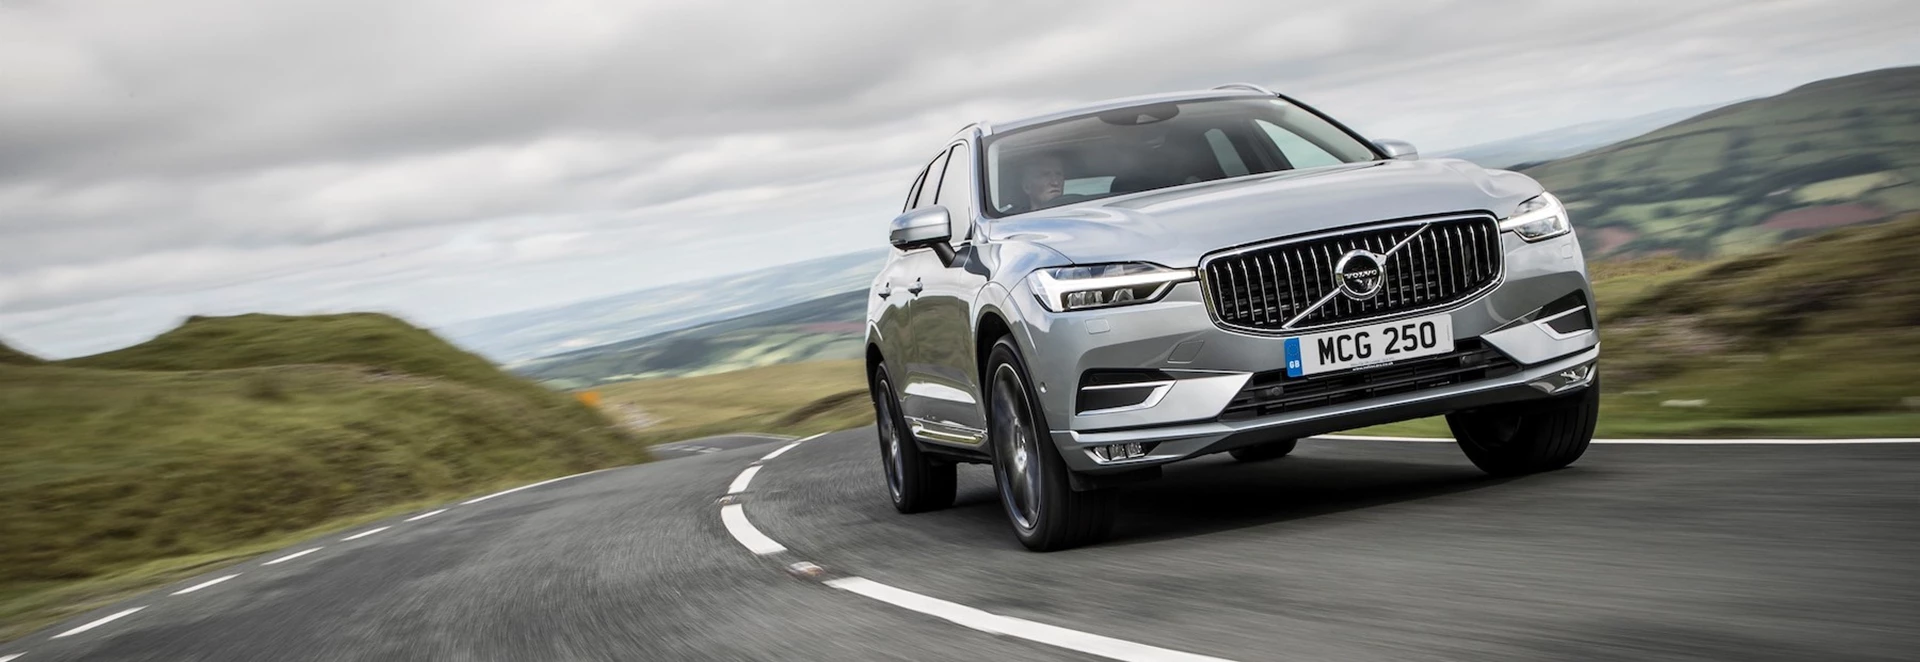 Five unusual features on the 2019 Volvo XC60 that may surprise you…